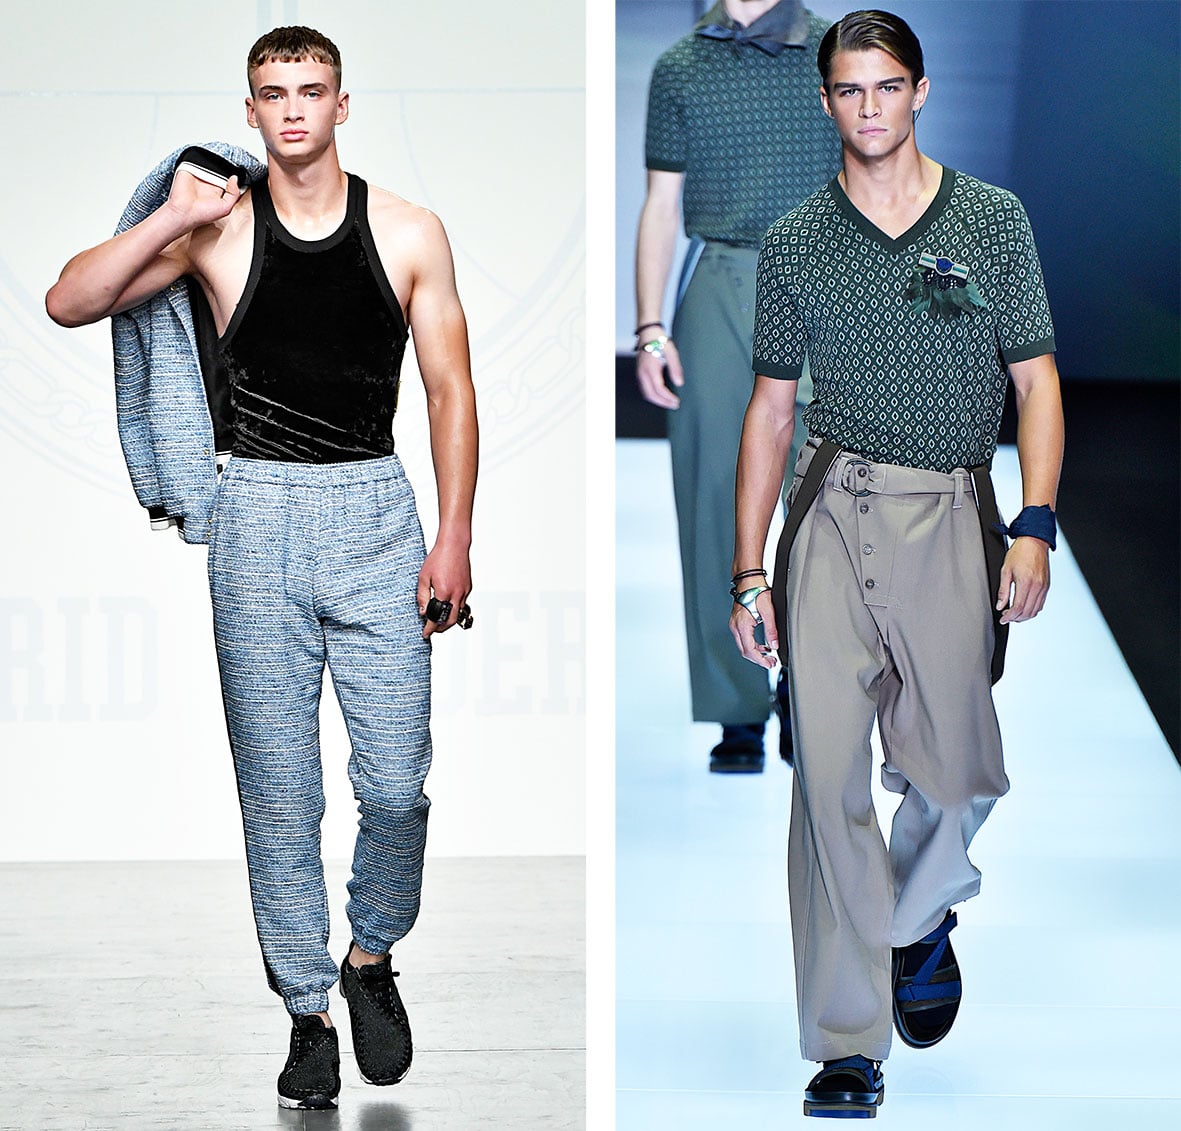 Casual pants for men at Astrid Andersen and Armani Runway Show.